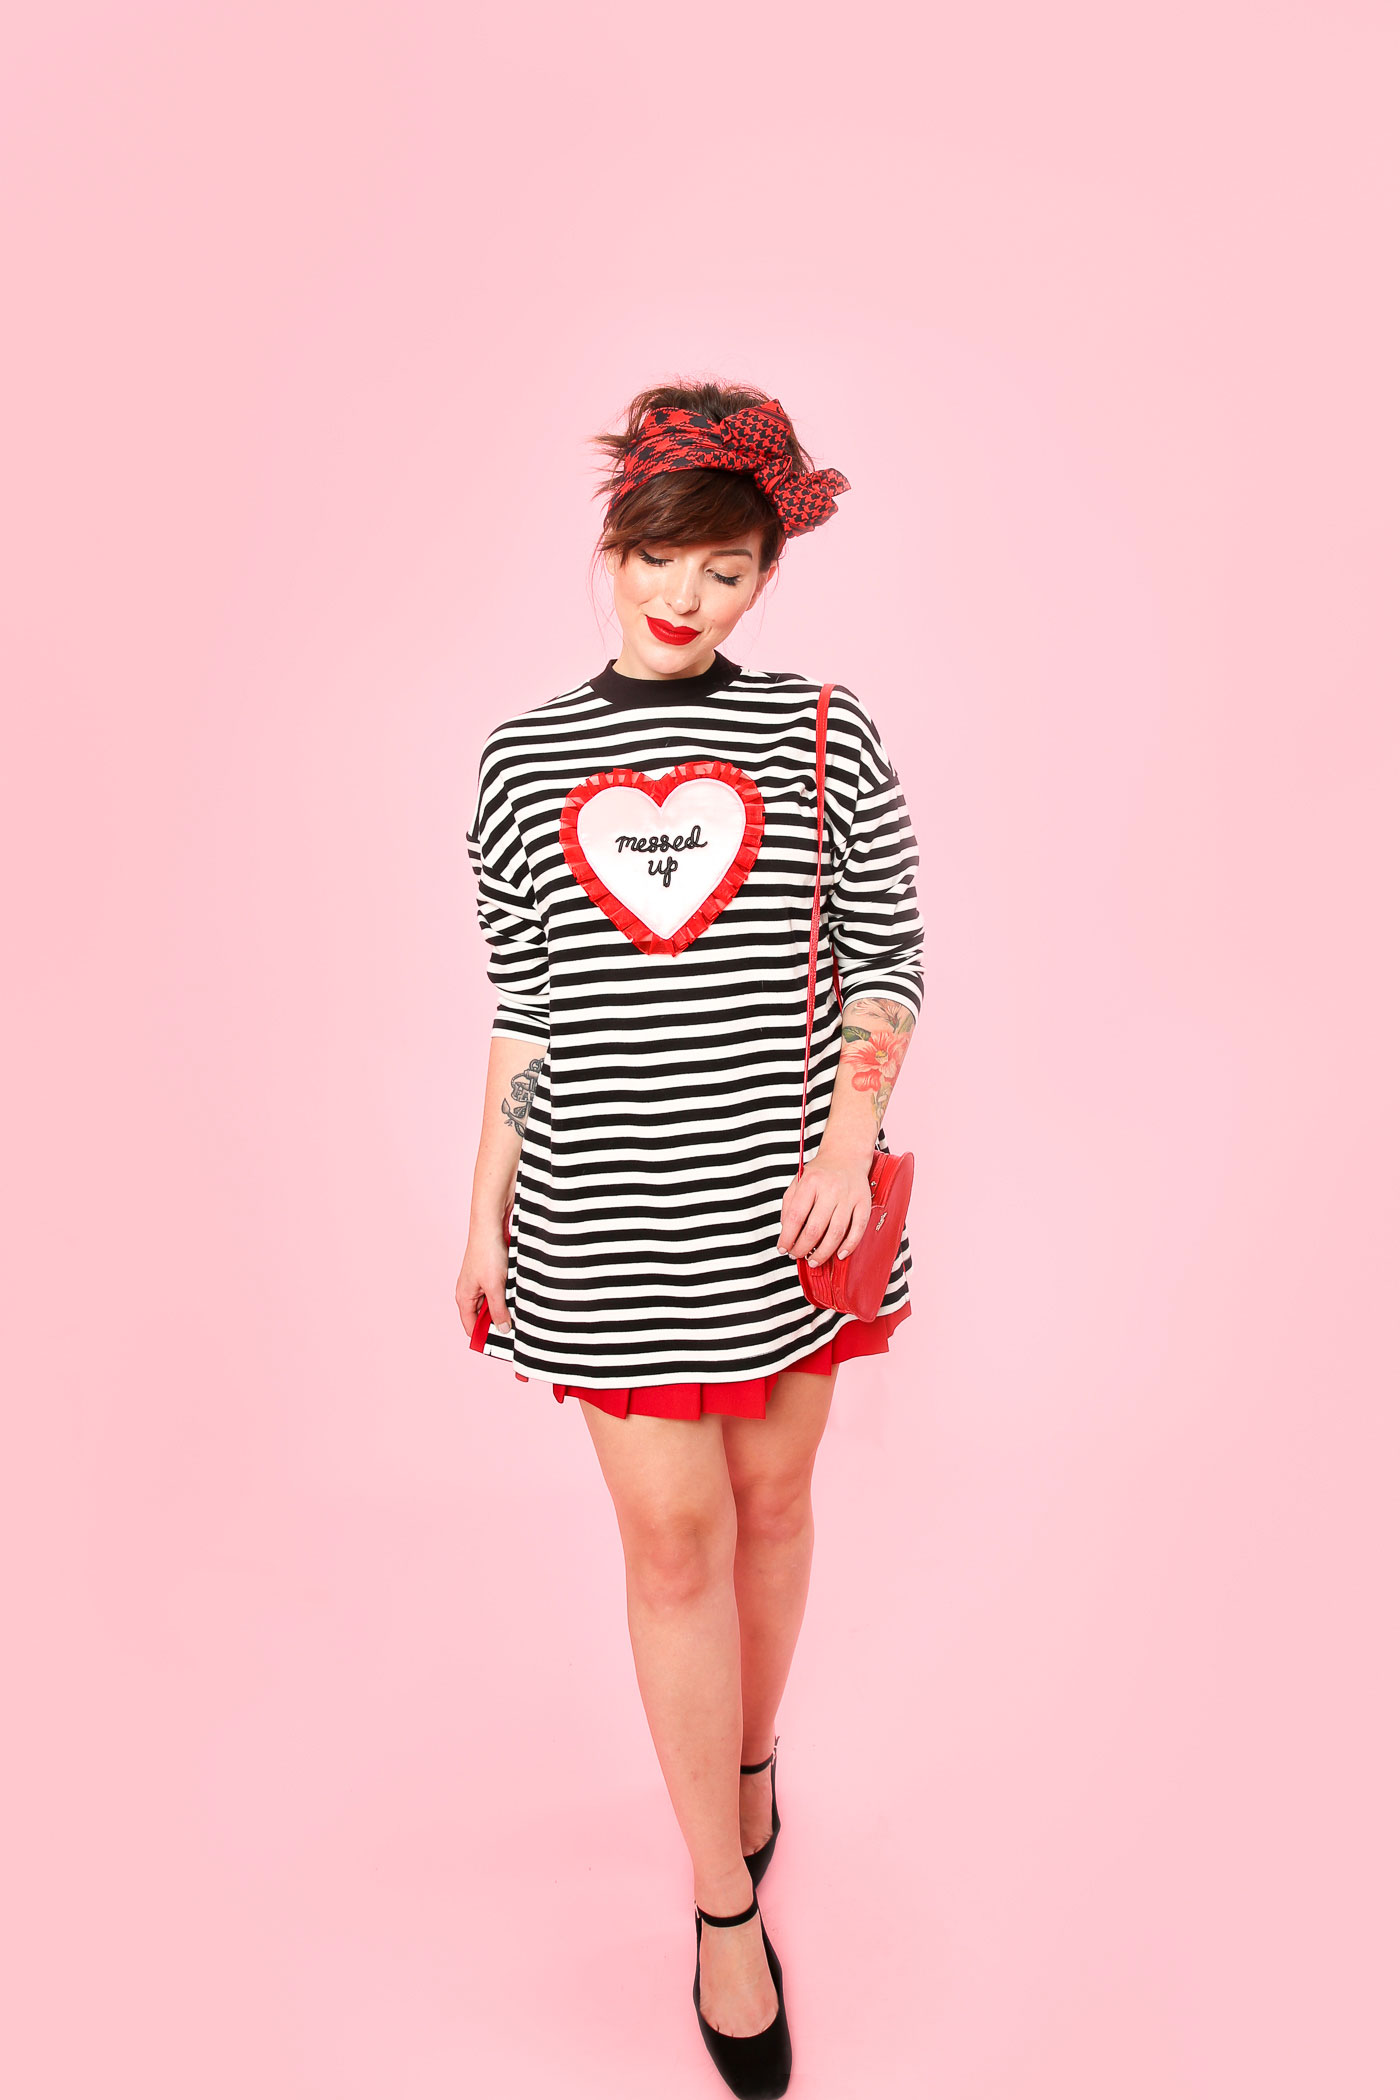 keiko lynn wearing lazy oaf oversized shirt and red skirt